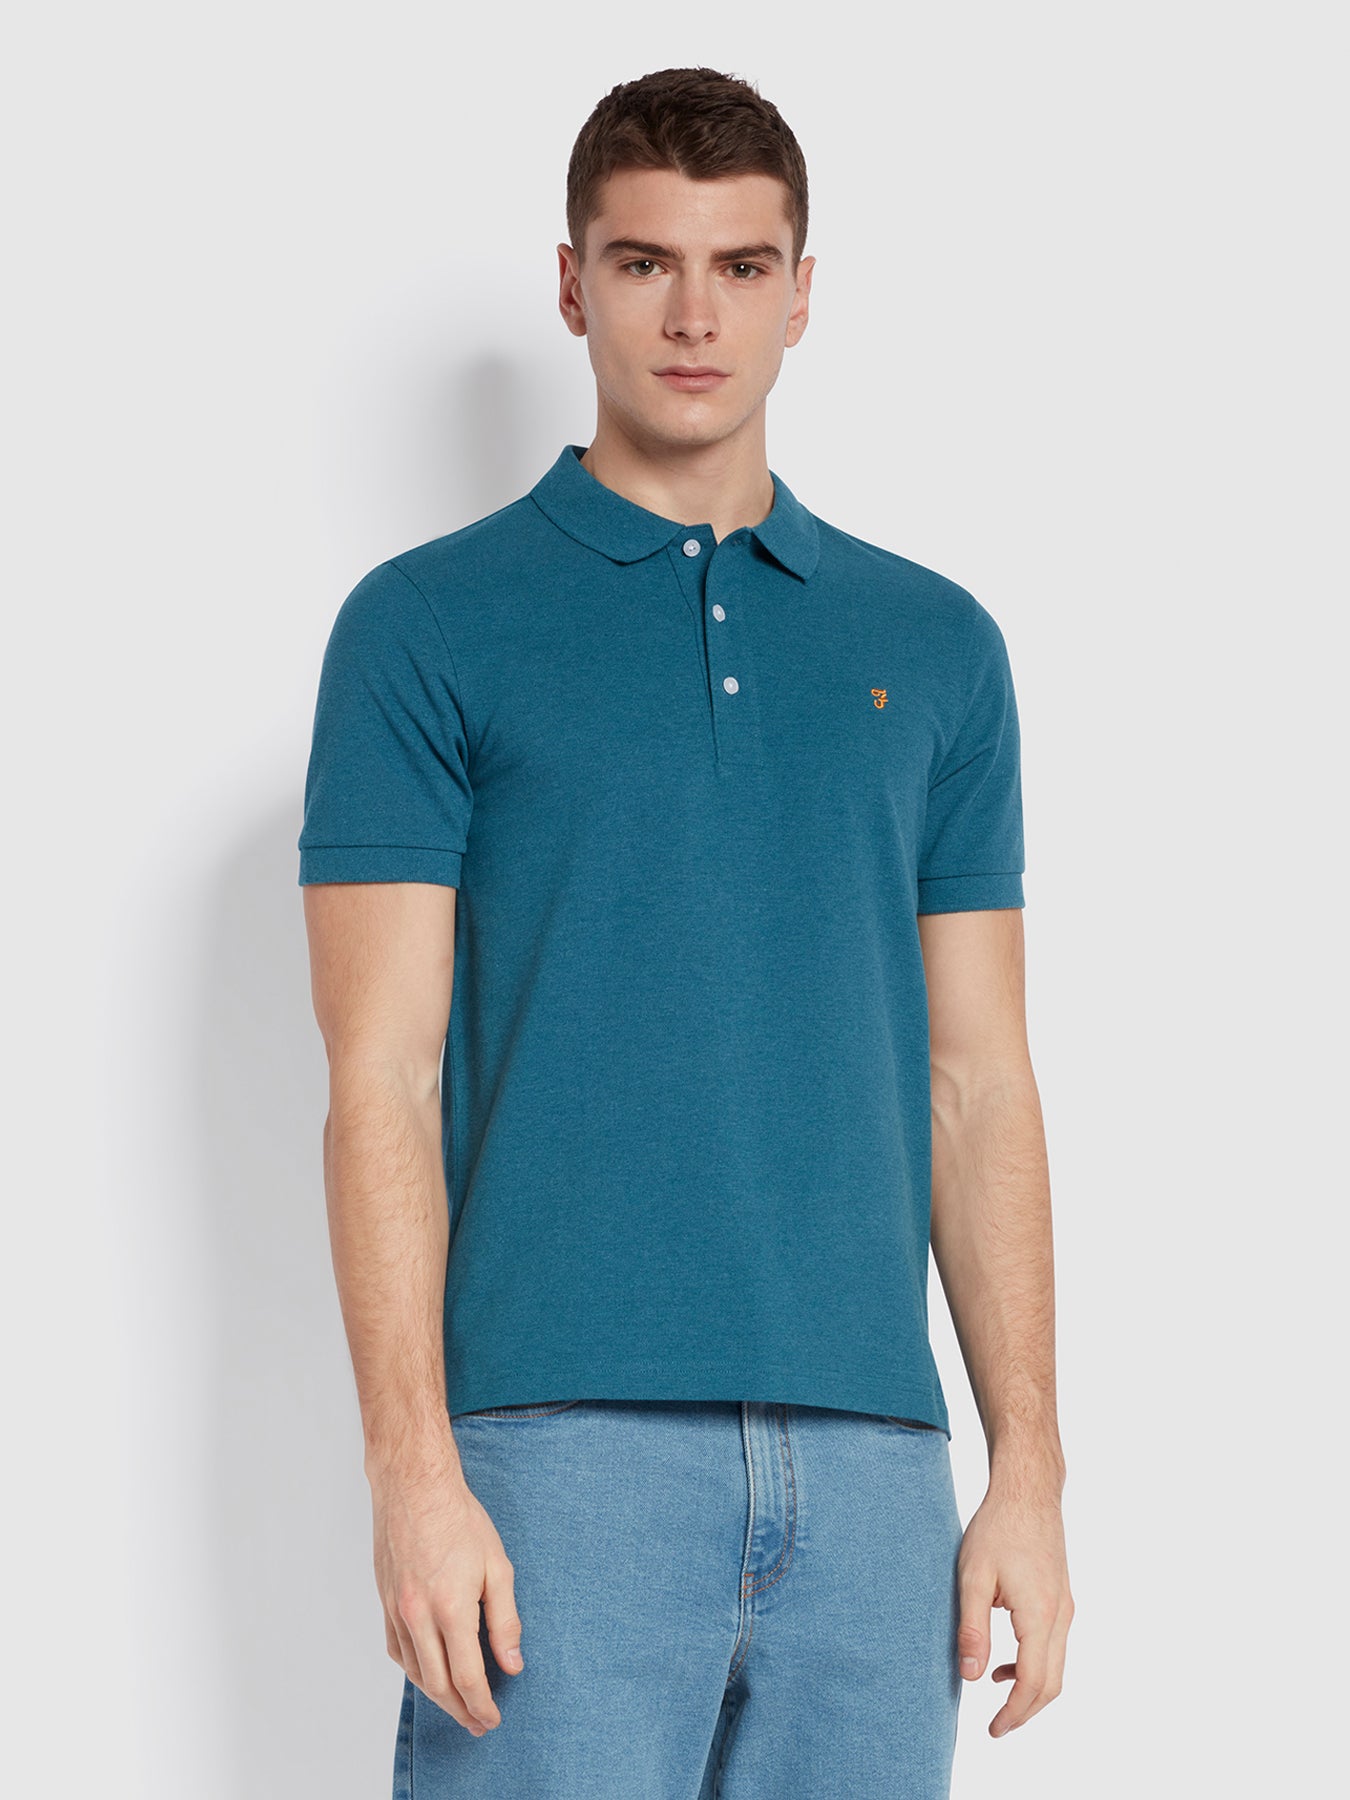 View Blanes Slim Fit Short Sleeve Polo Shirt In Petrol Blue Marl information